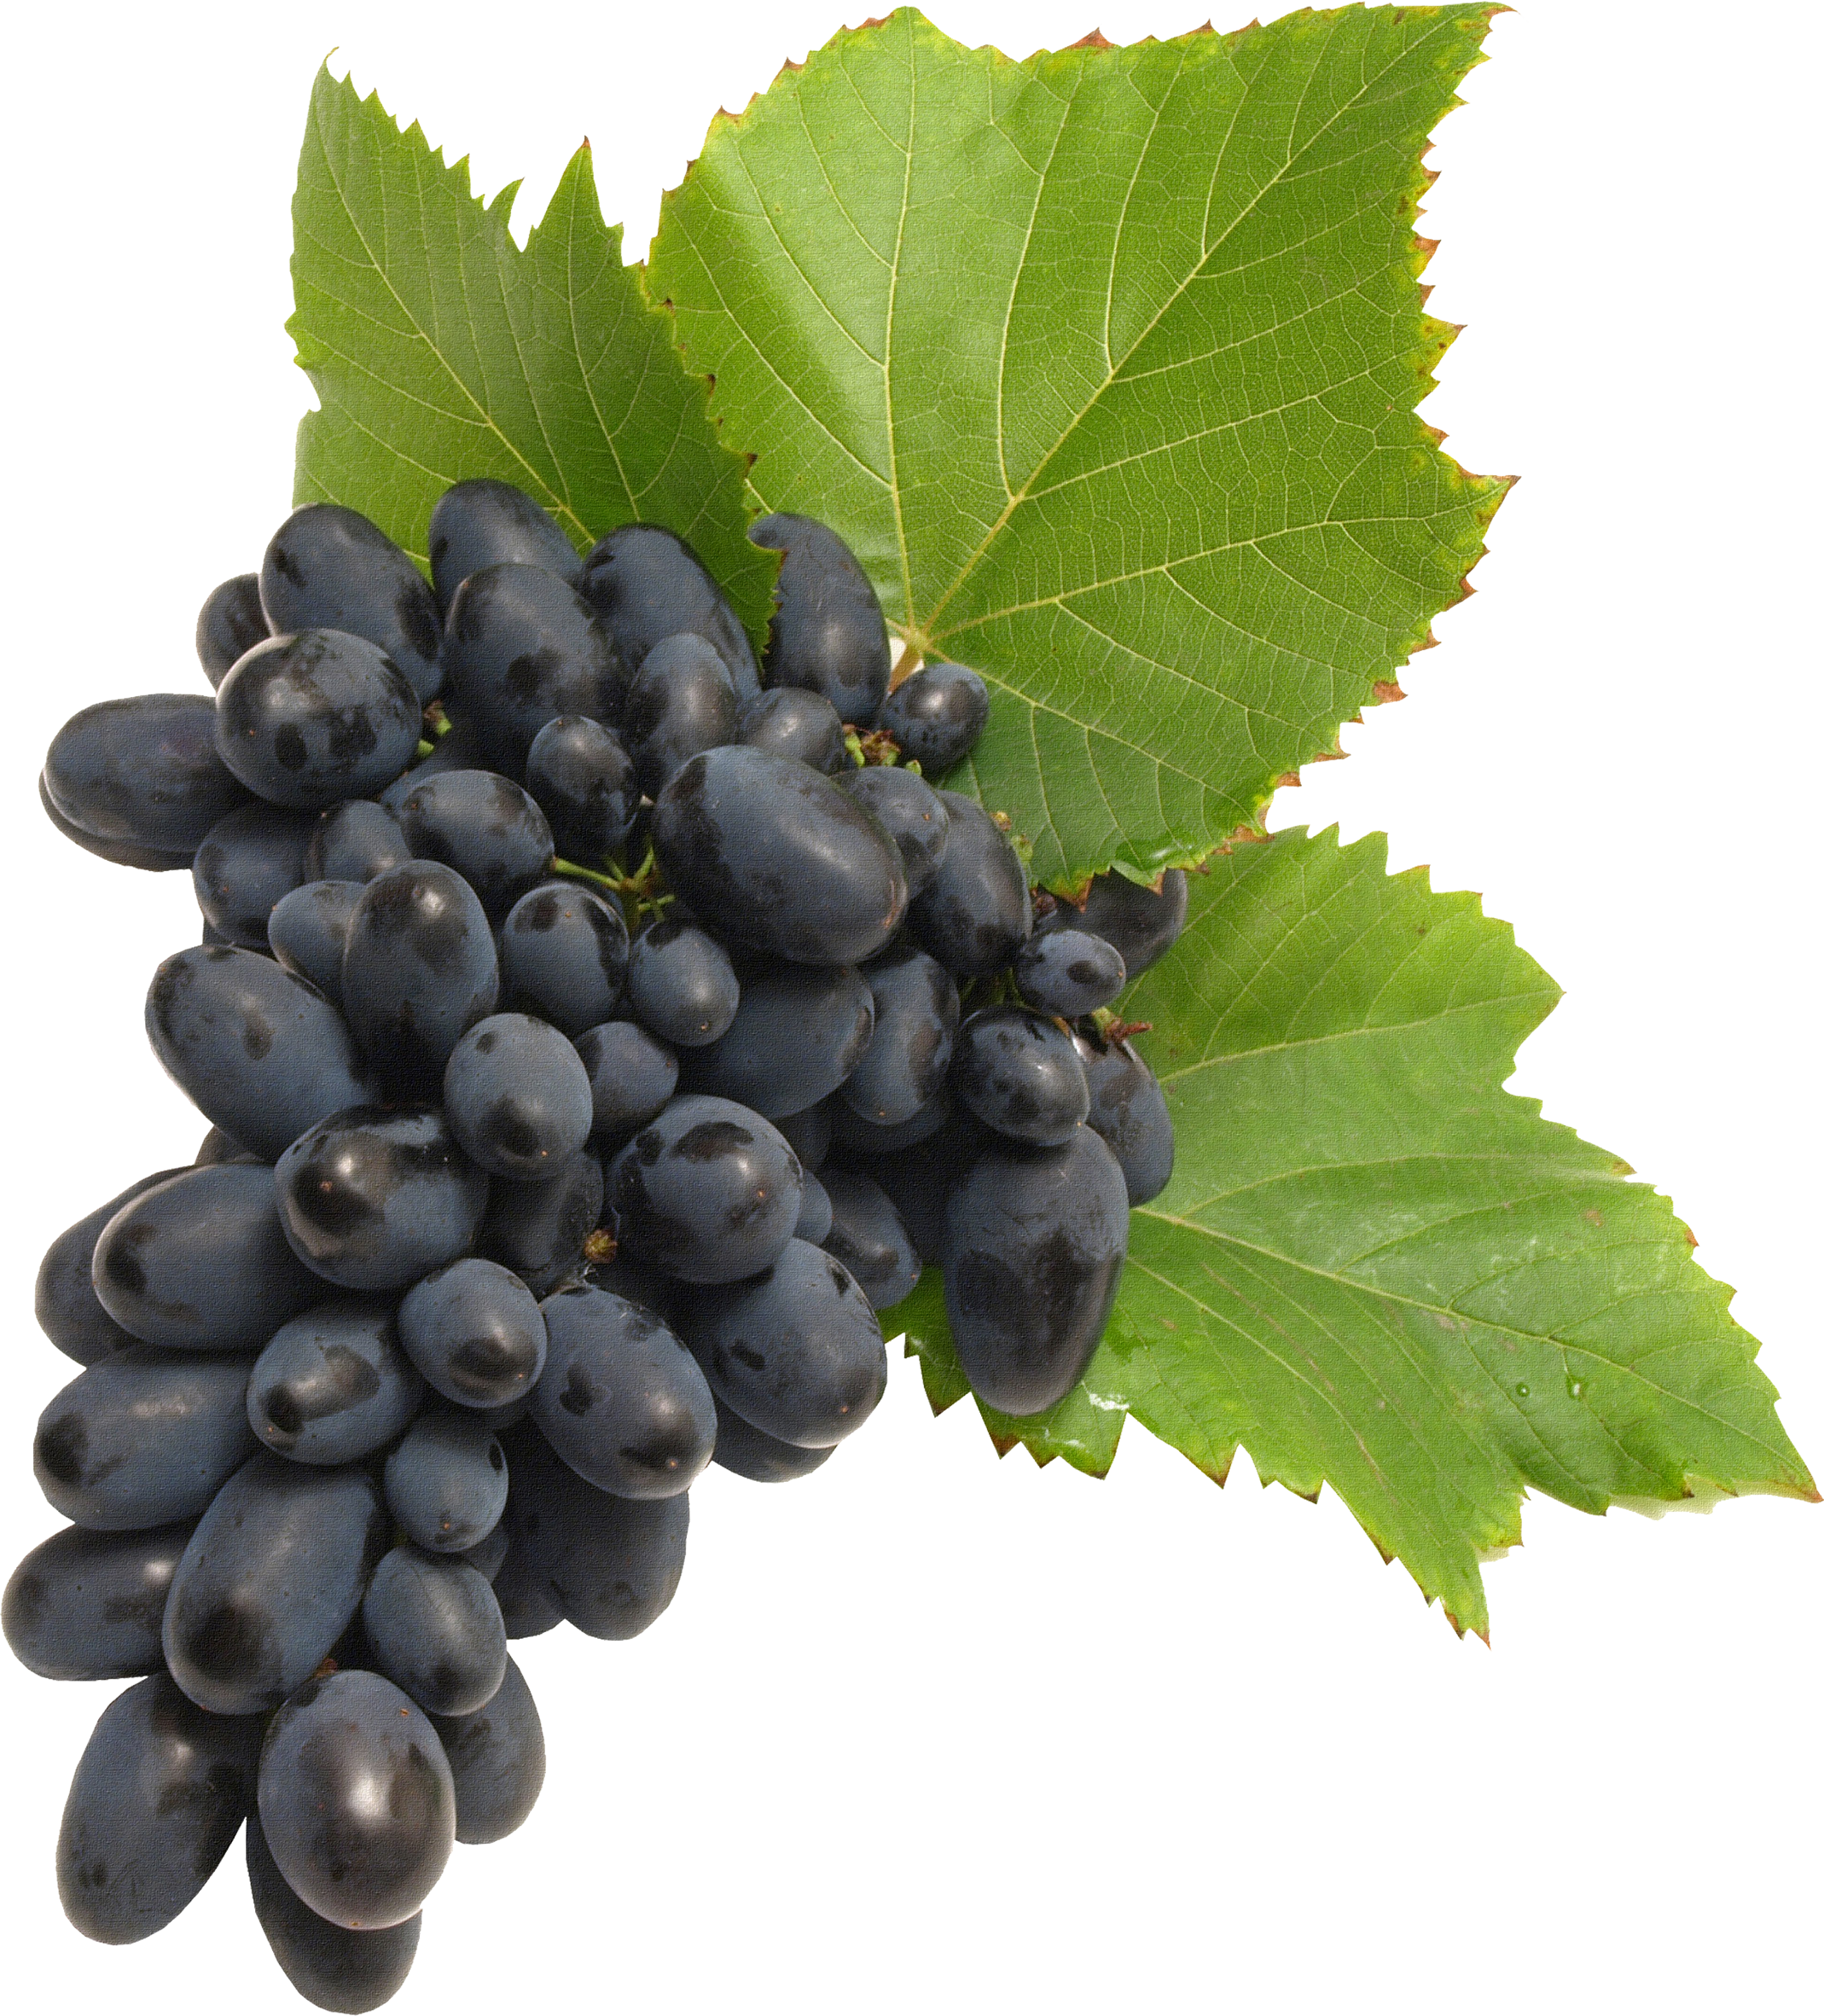 . Hdpng.com Grapes Gallery Isolated Stock Photos By Nobacks Hdpng.com  - Grape Vine, Transparent background PNG HD thumbnail